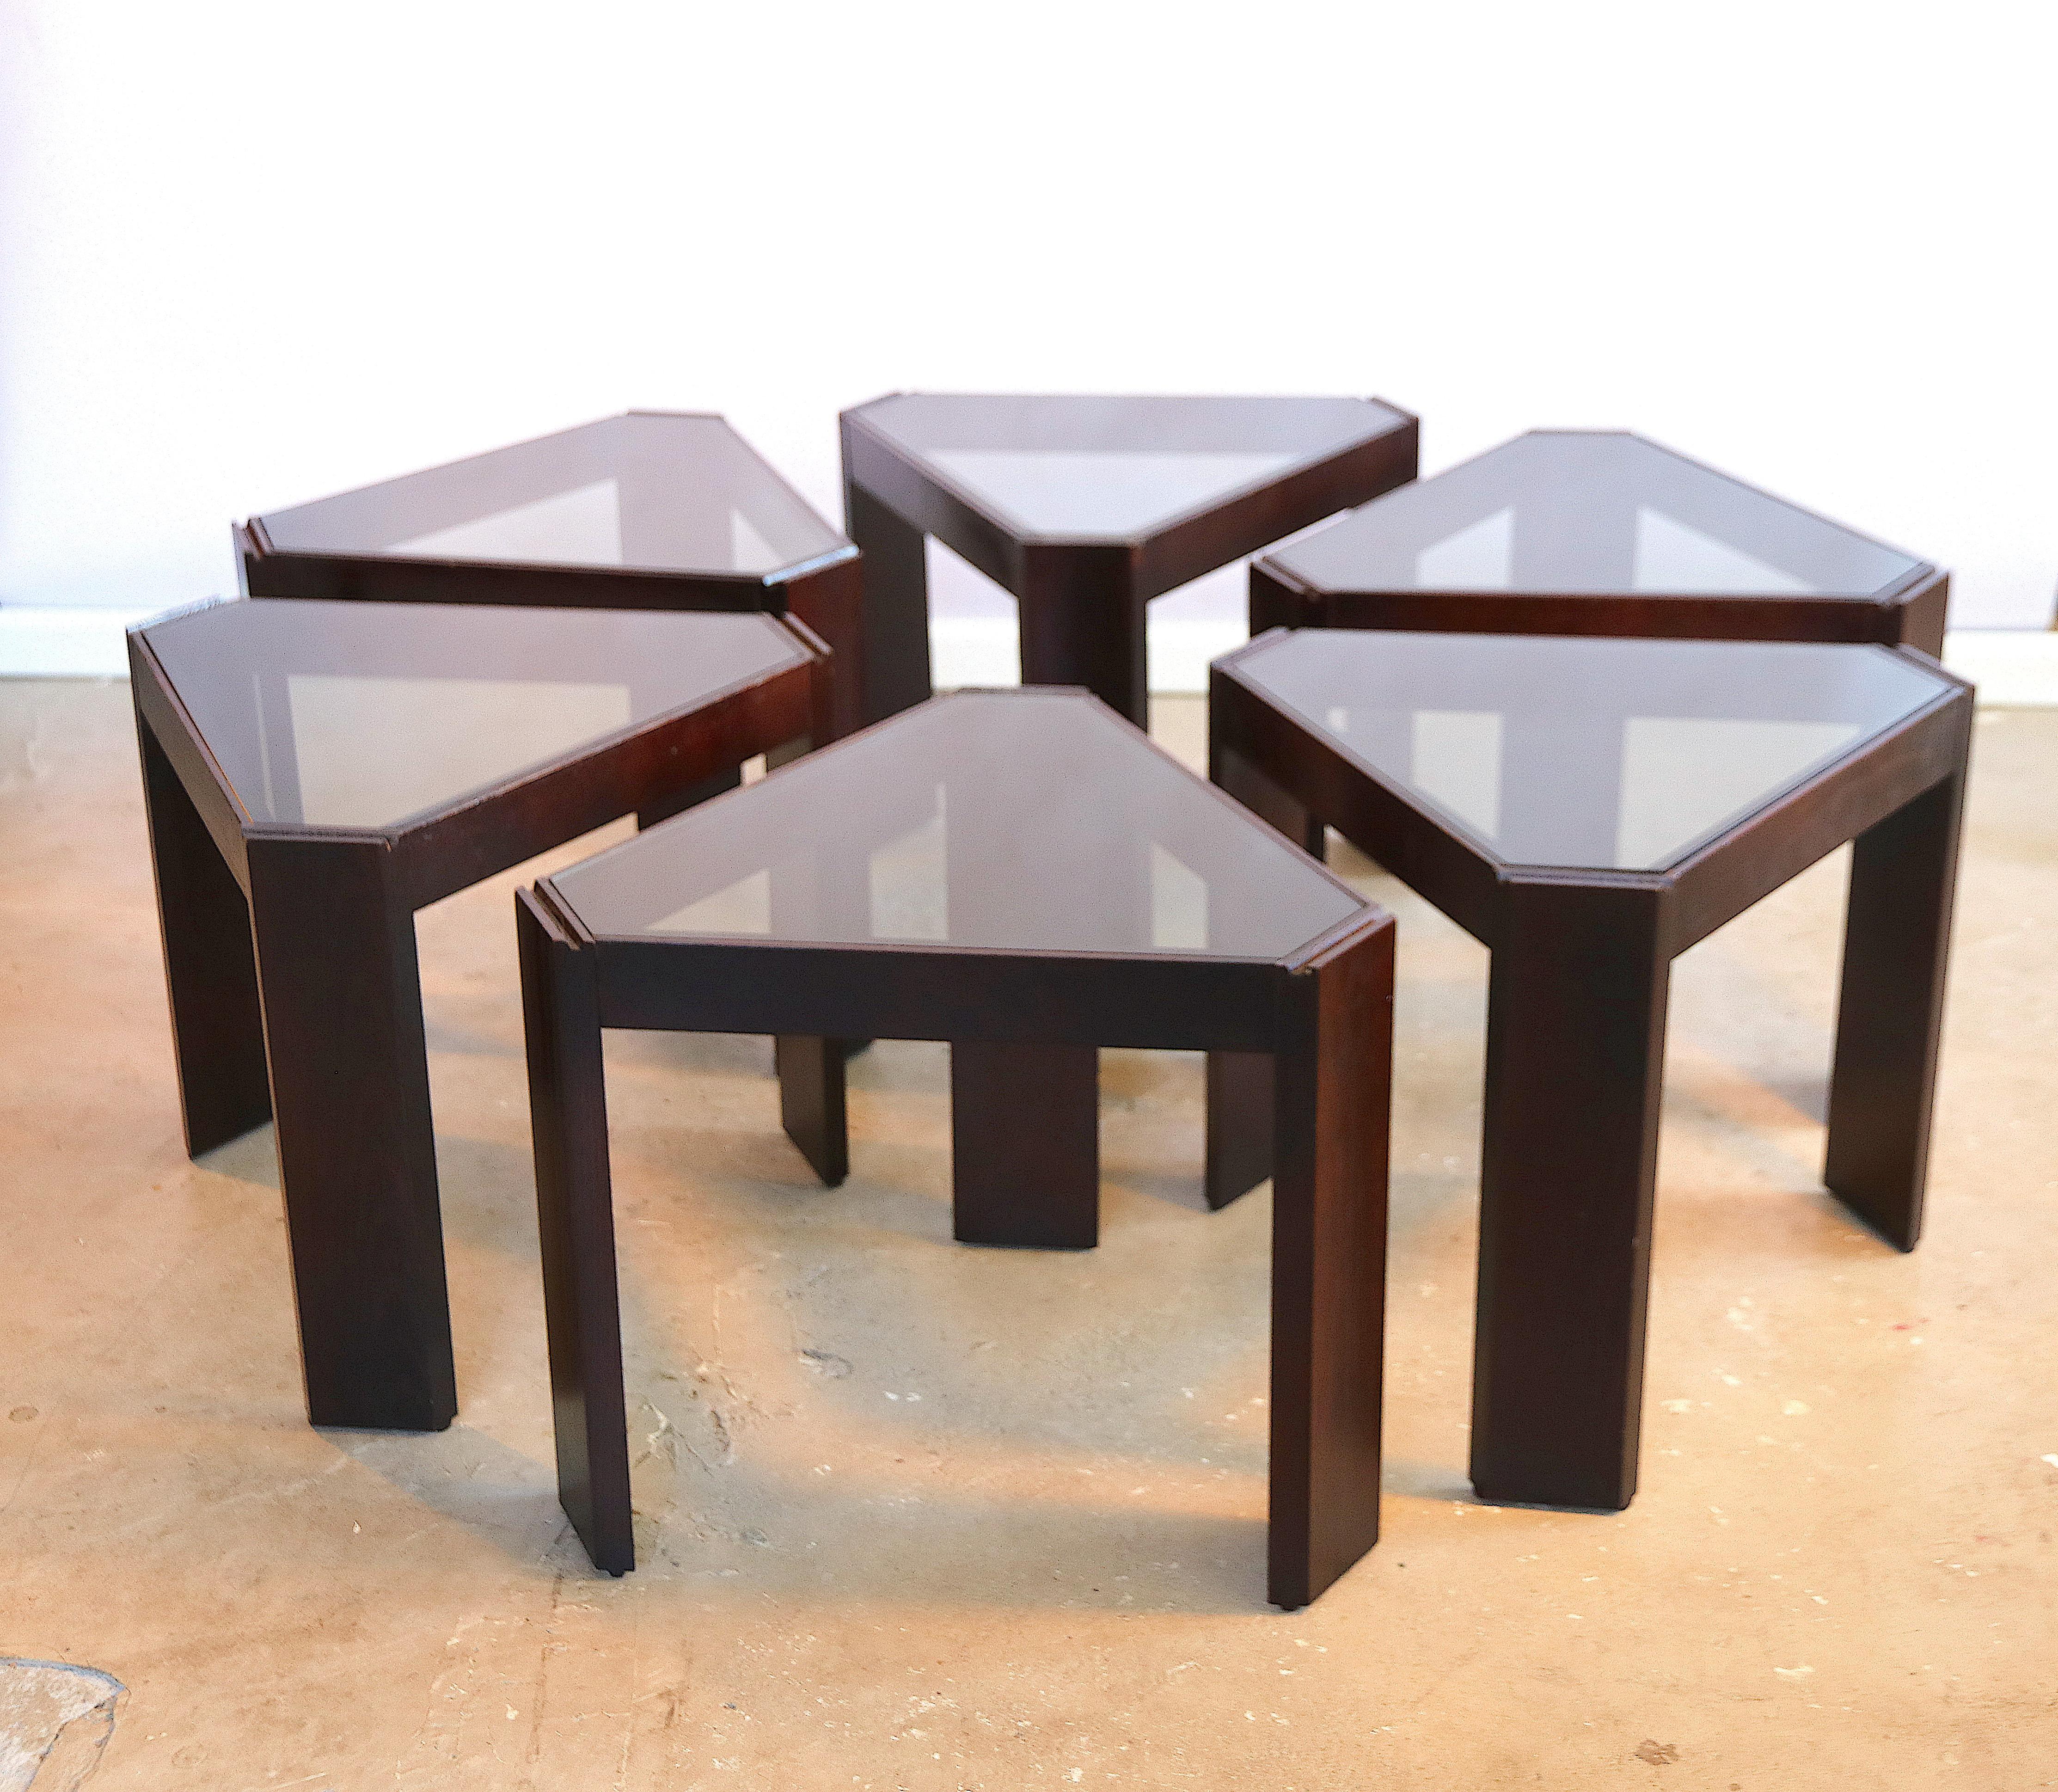 Wonderful set of multi functional side tables by Porada Arredi, Italy, 1970s. You can make figures on the floor with the triangle shaped frames, set them anyway you like, and also stack them on top of each other to create an étagère or display unit;